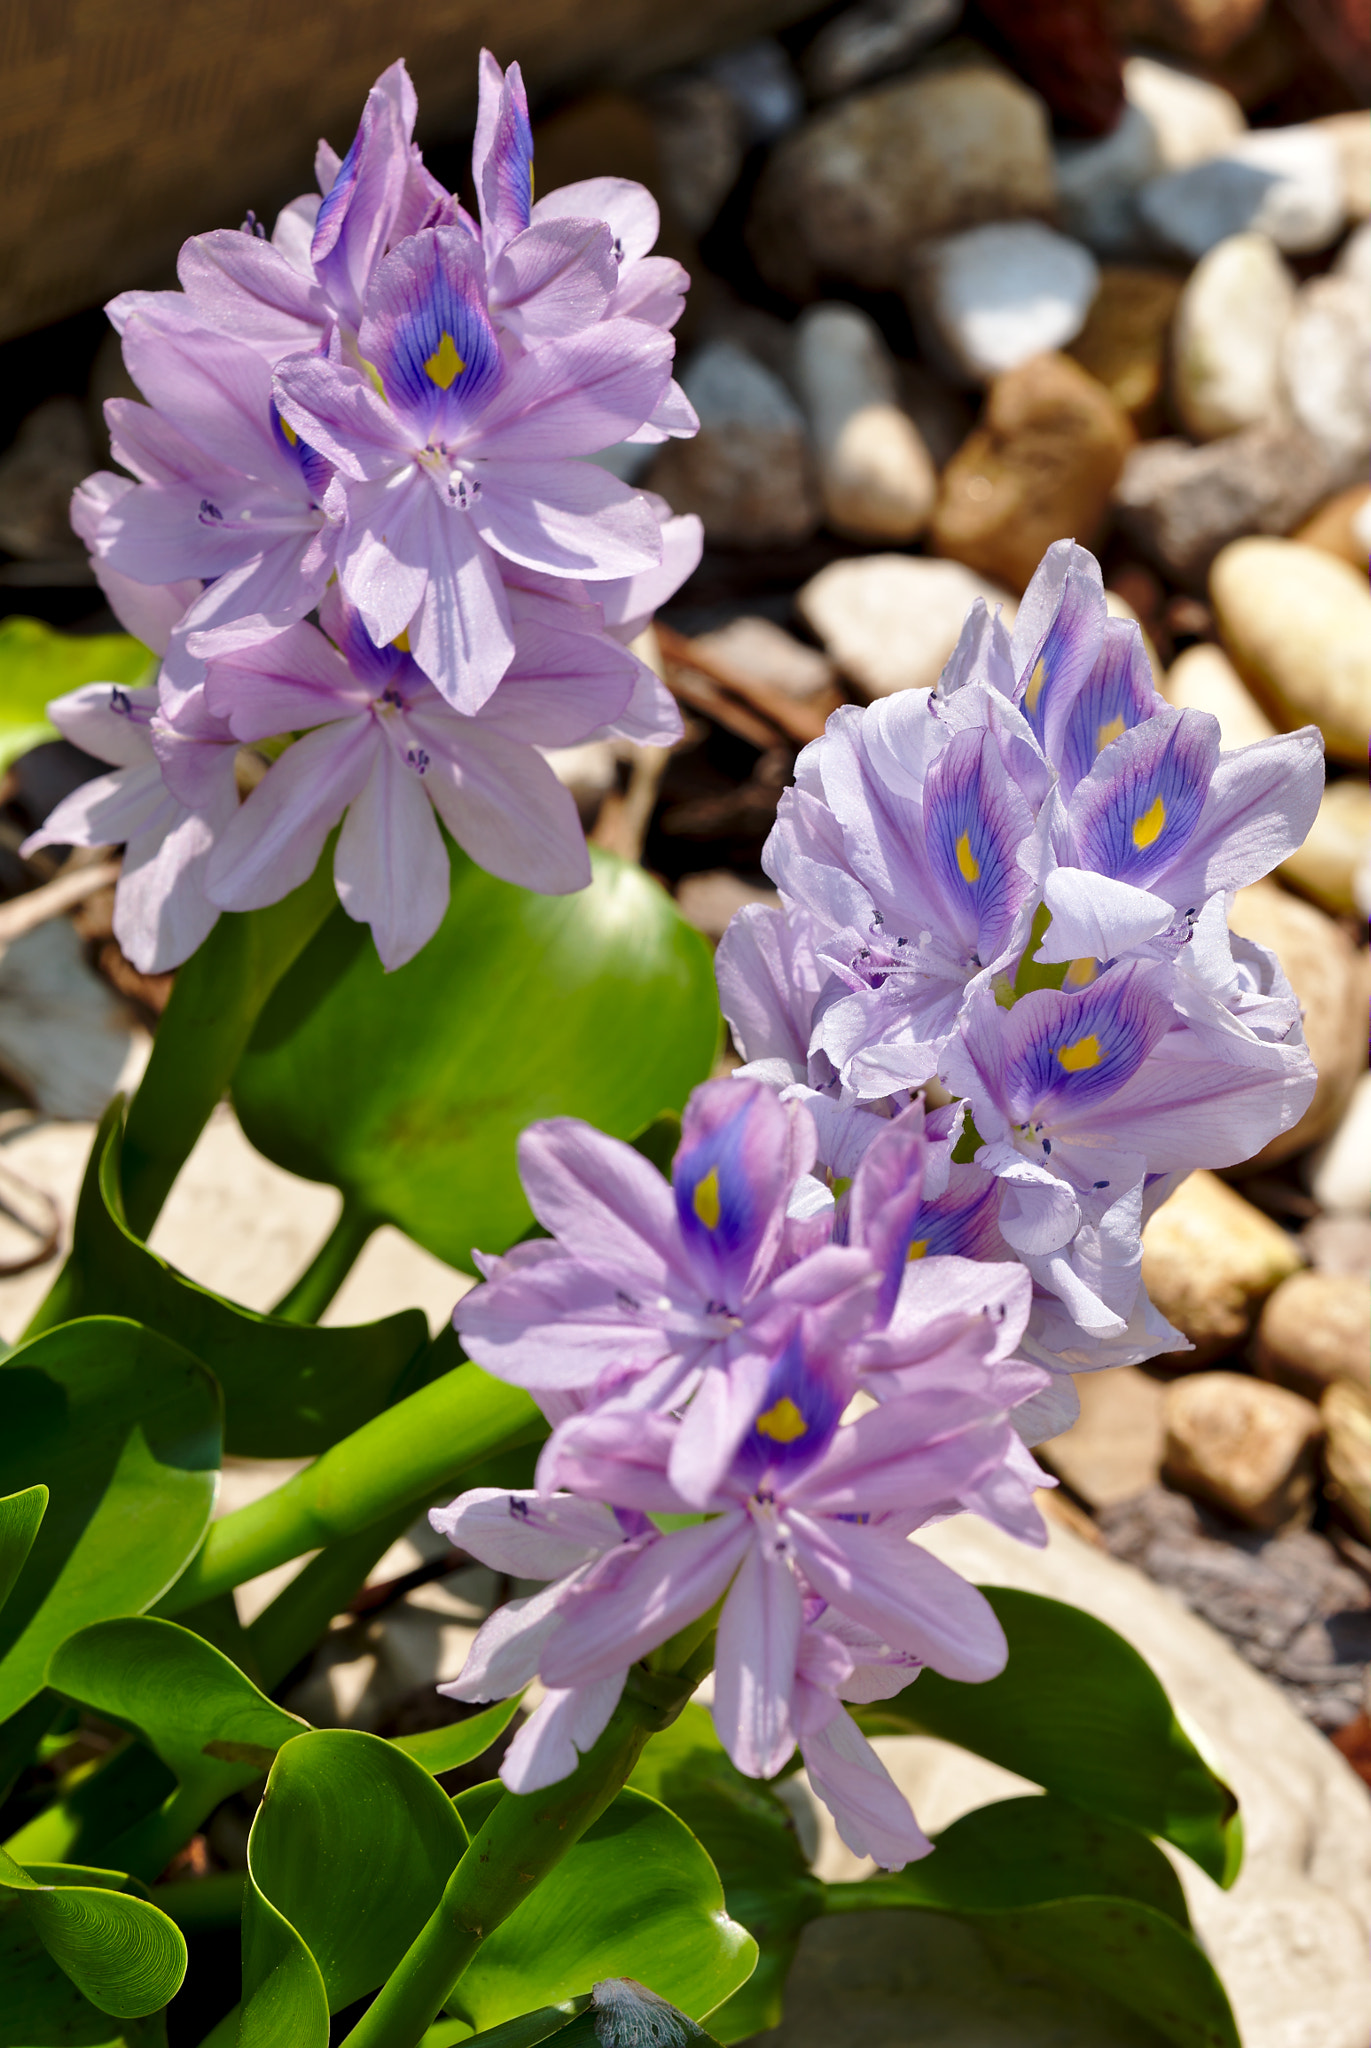 ZEISS Otus 85mm F1.4 sample photo. Water hyacinth / eichhornia crassipes photography